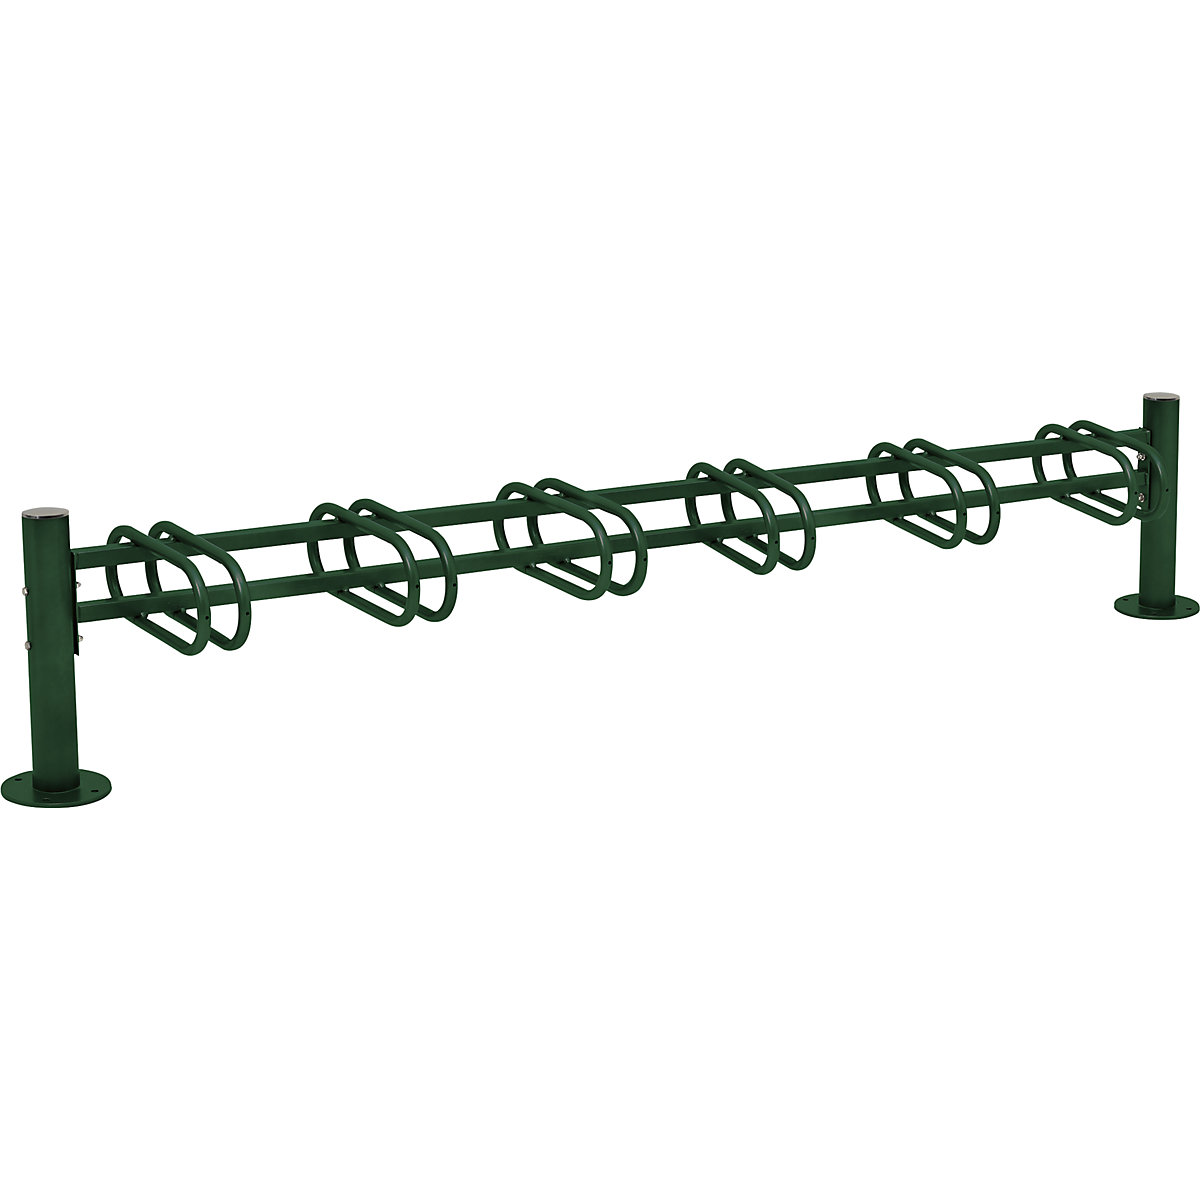 PROVINCE bicycle rack – PROCITY, 6 parking spots, single-sided, moss green-2